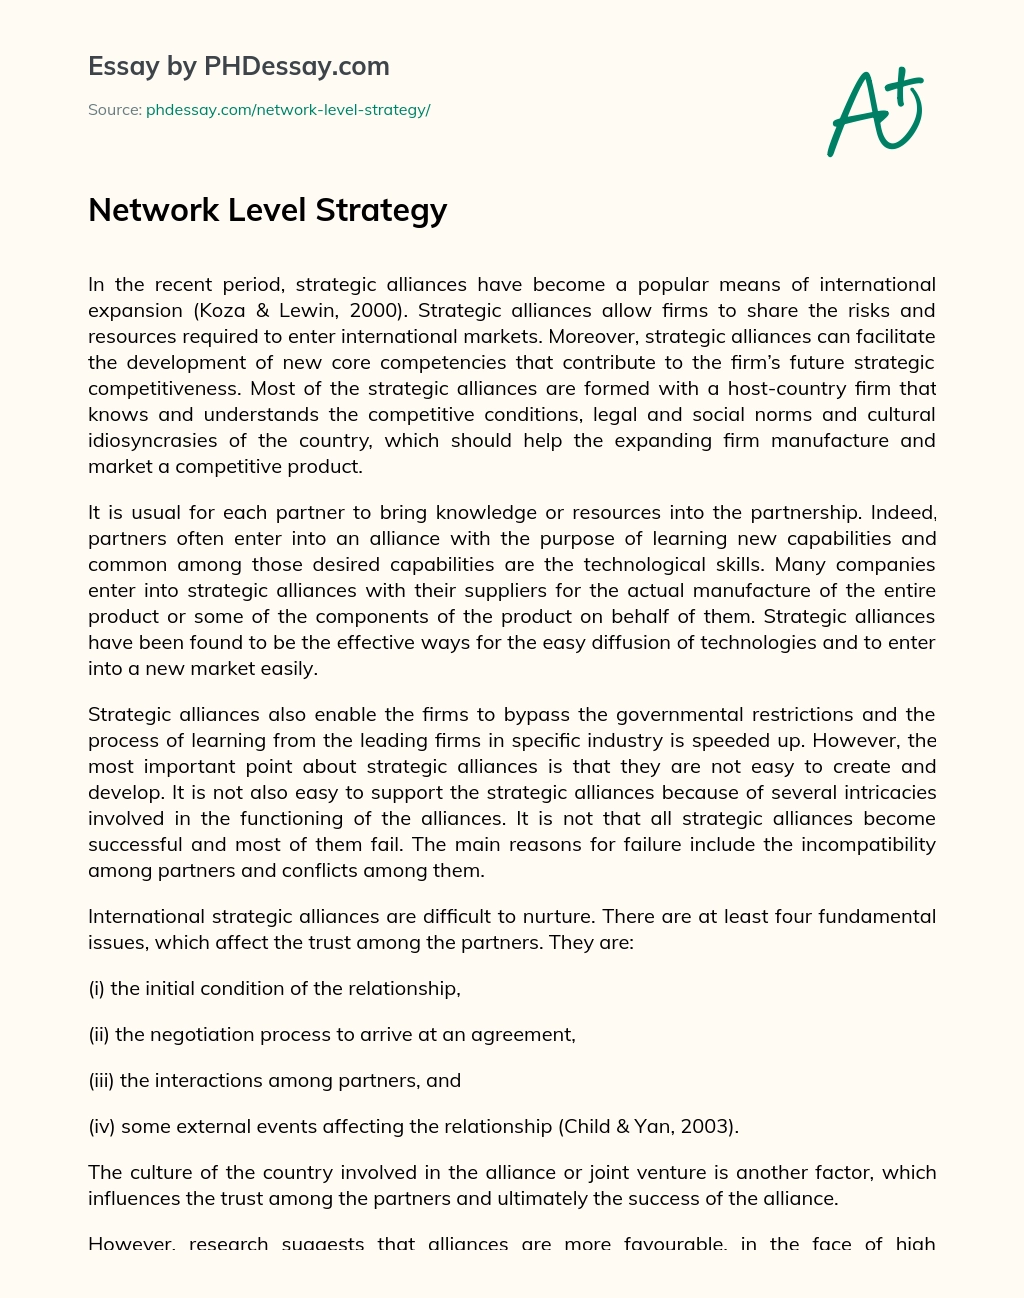 Network Level Strategy essay